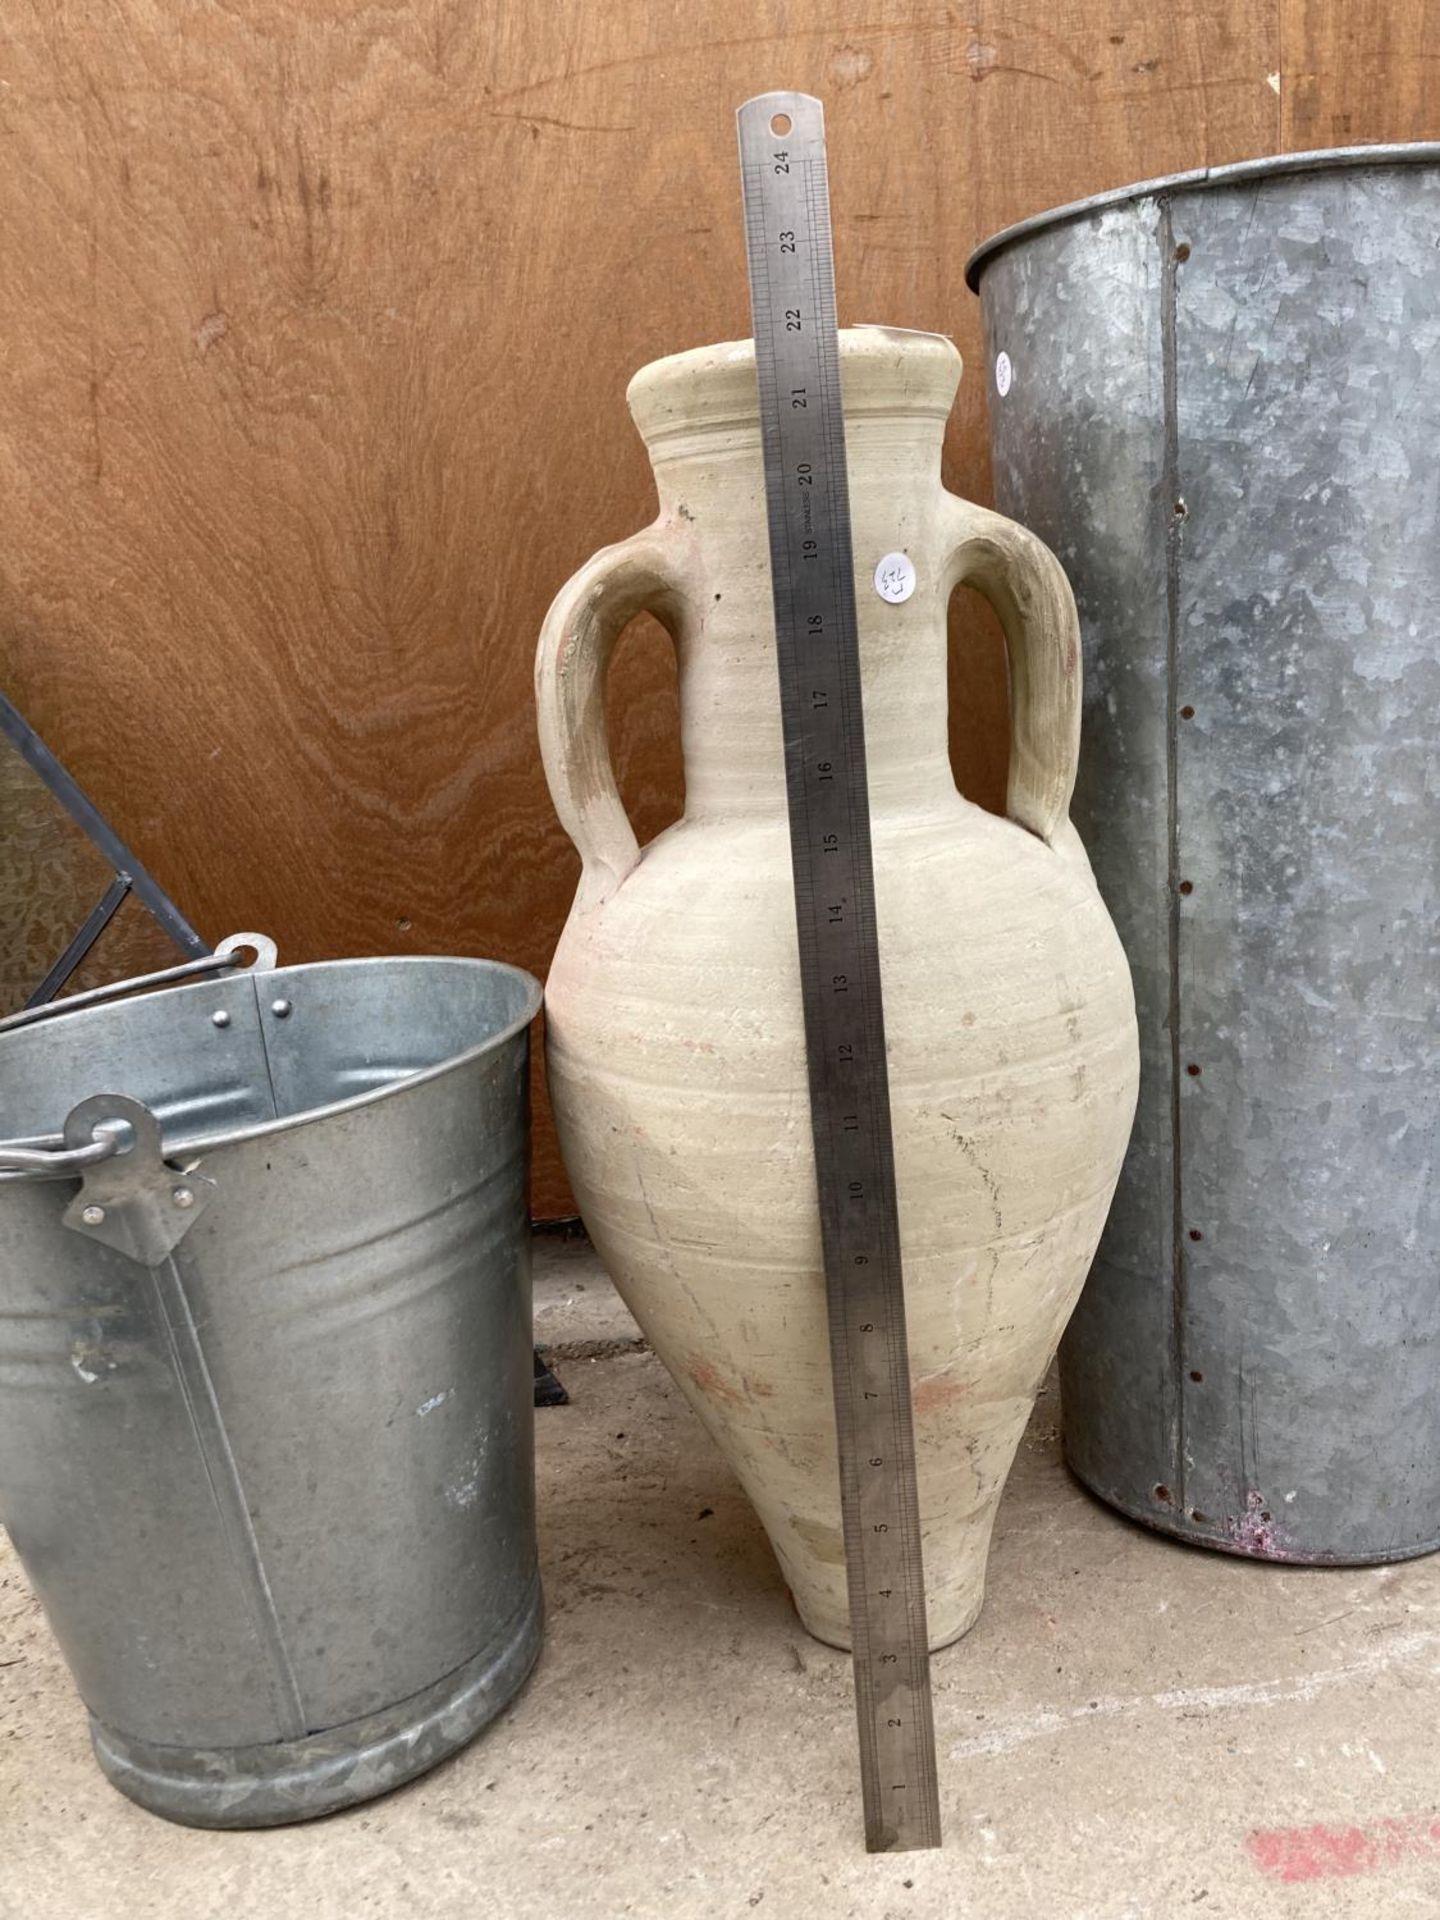 TWO GALAVANISED BUCKETS AND A CERAMIC URN VASE - Image 6 of 10